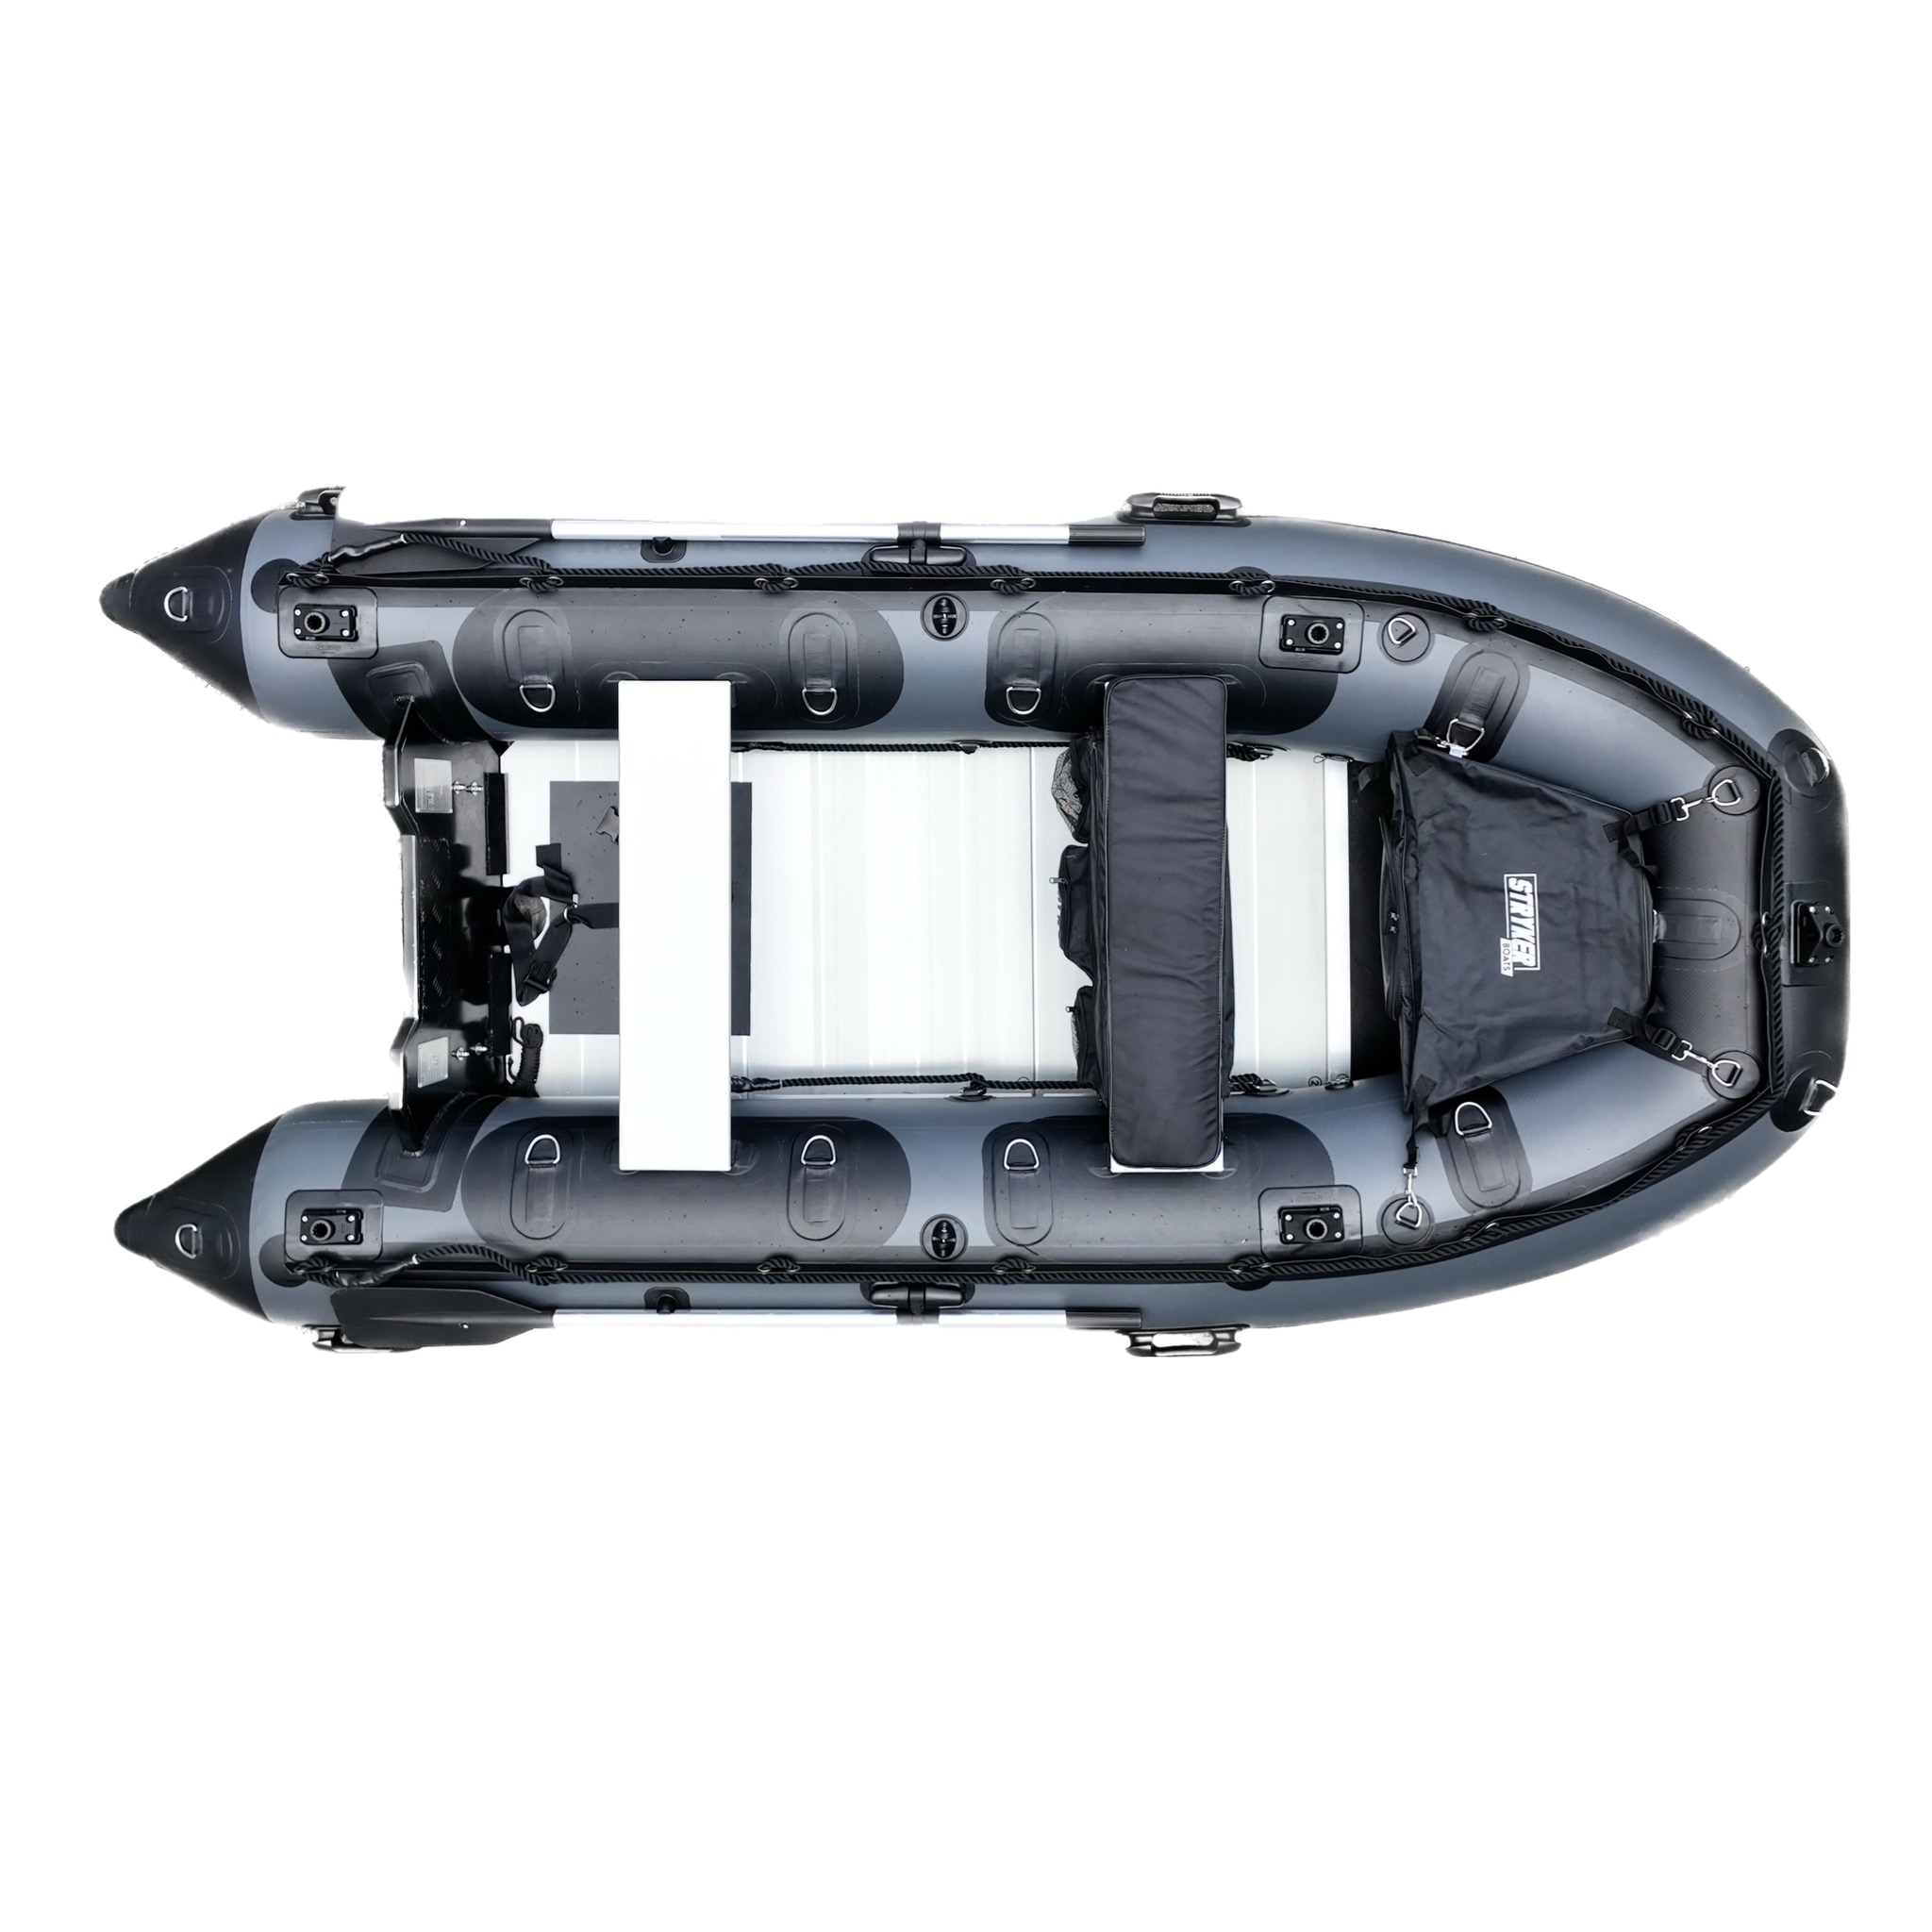 Stryker LX 320 (10’ 5”) Inflatable Boat